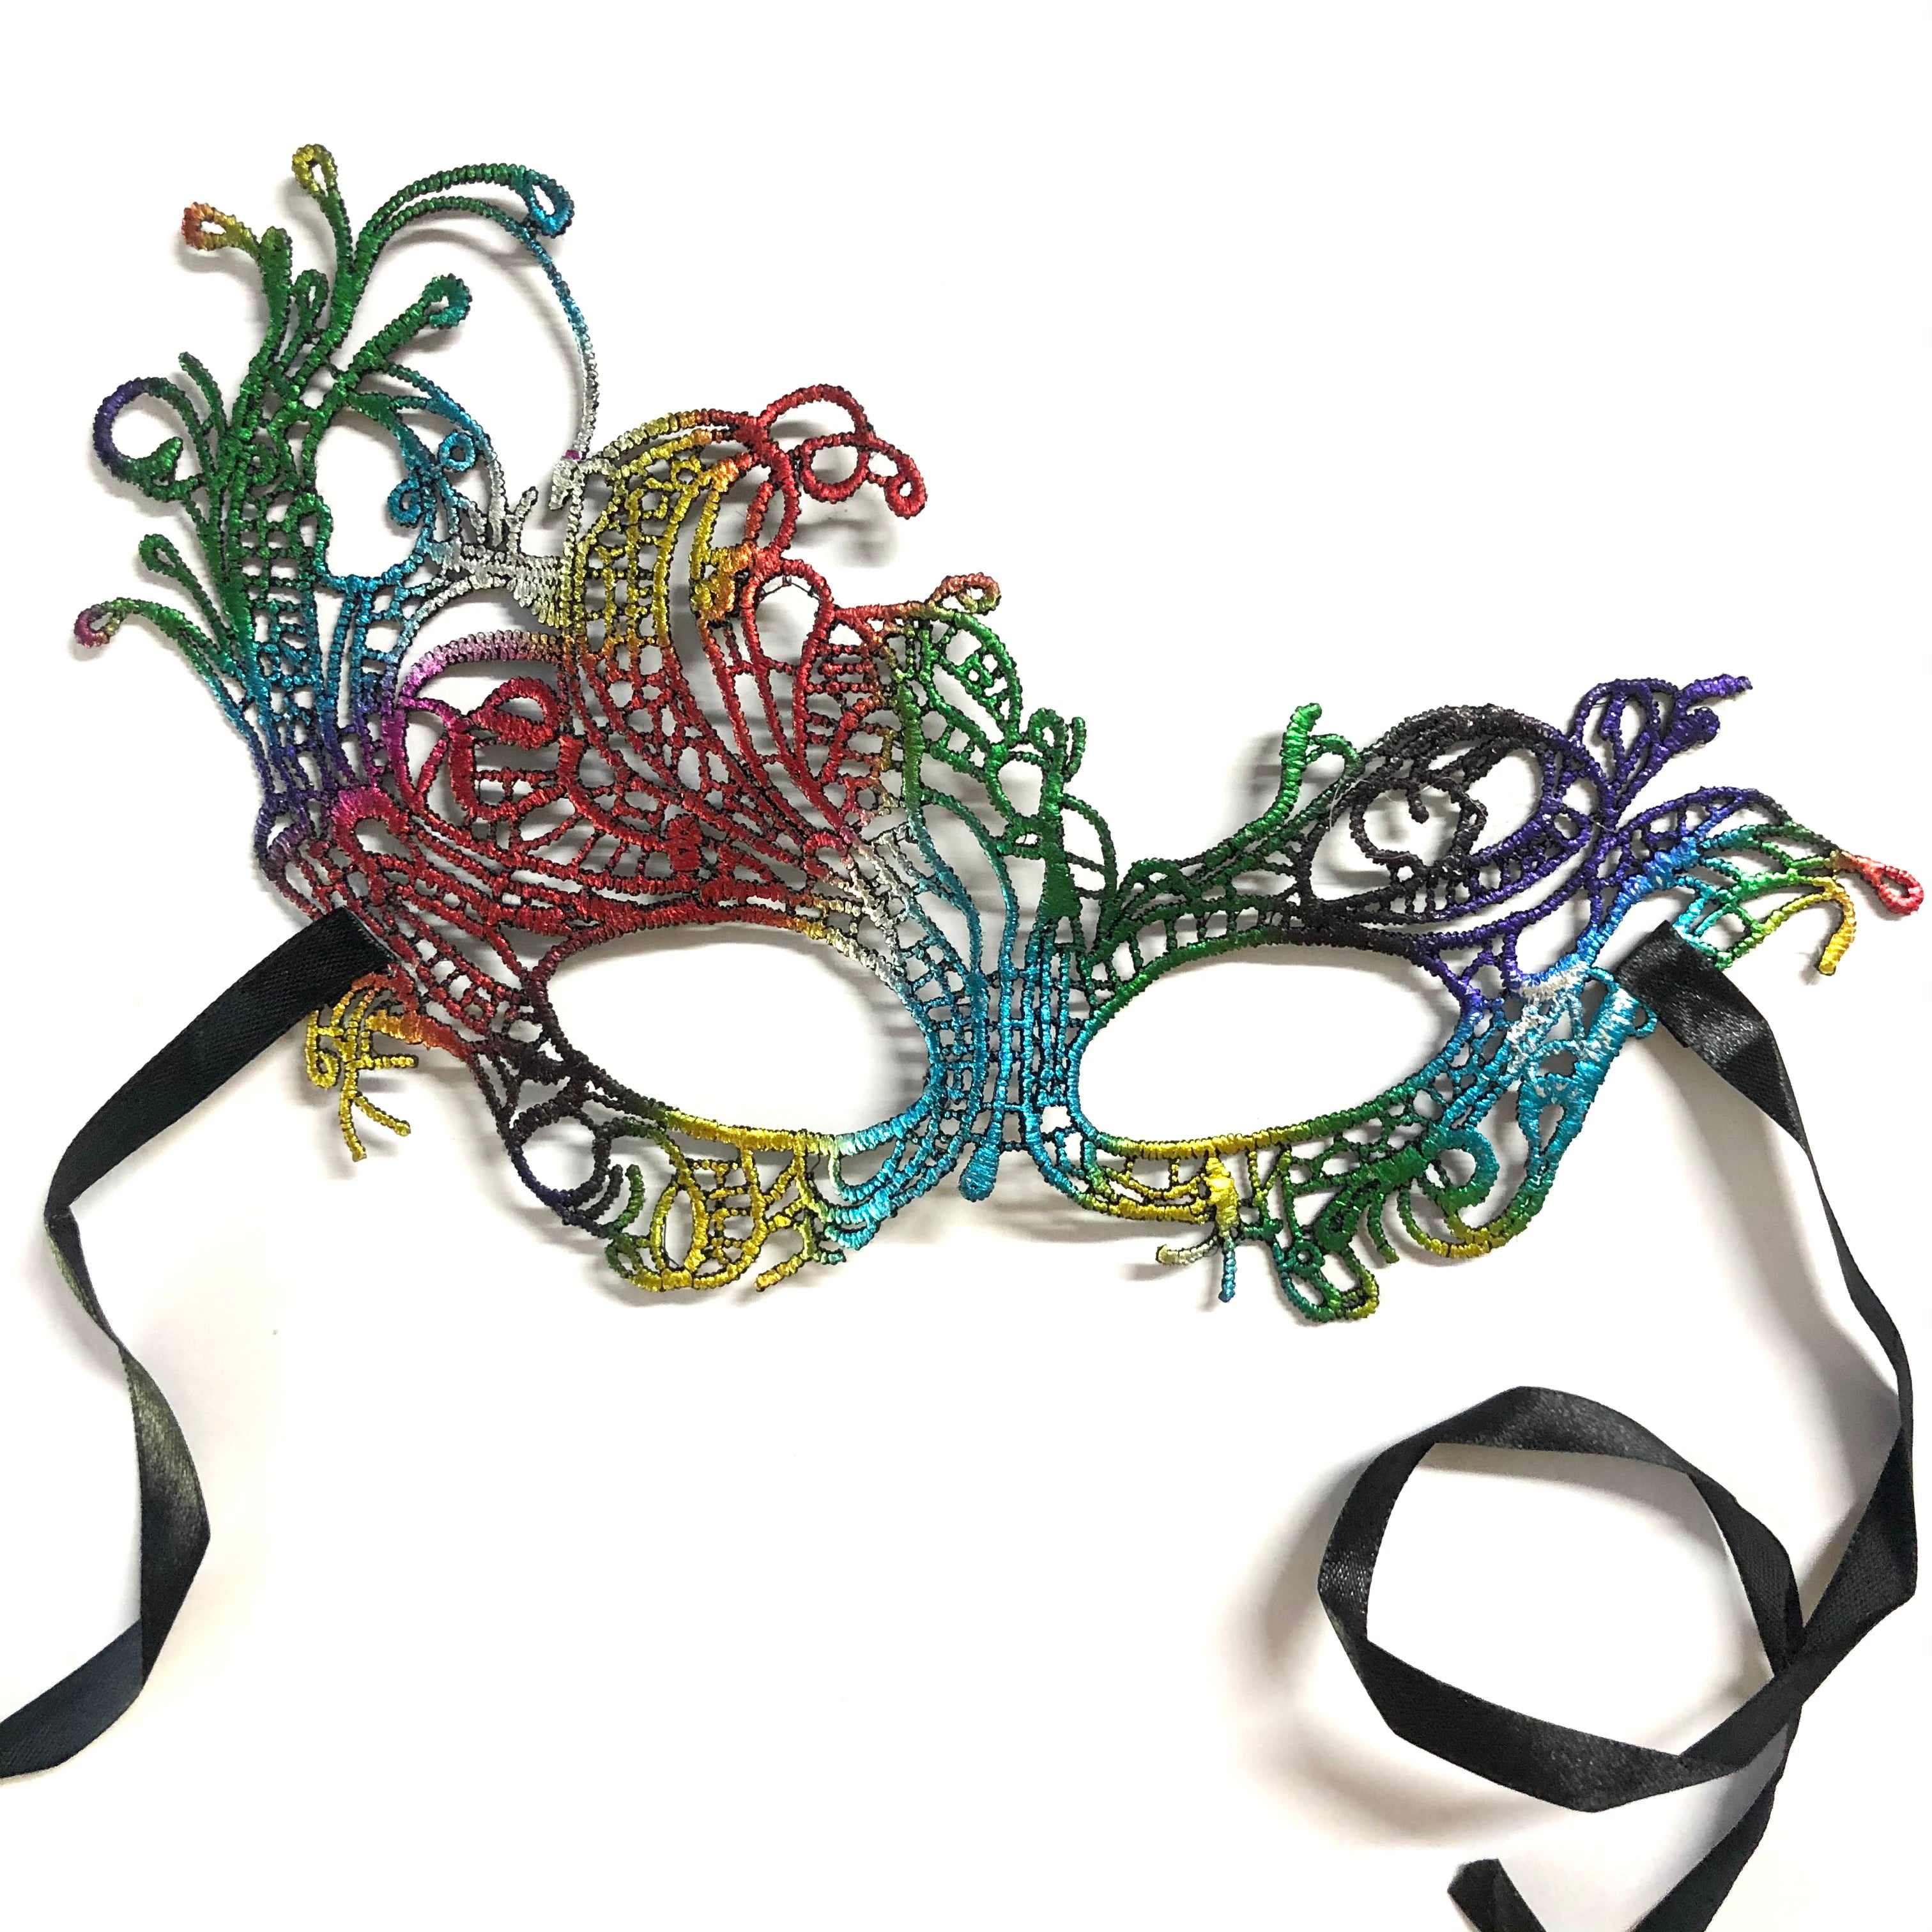 Women Lace Sexy Elegant Masquerade Ball Party Mask - Rainbow (Style 1)